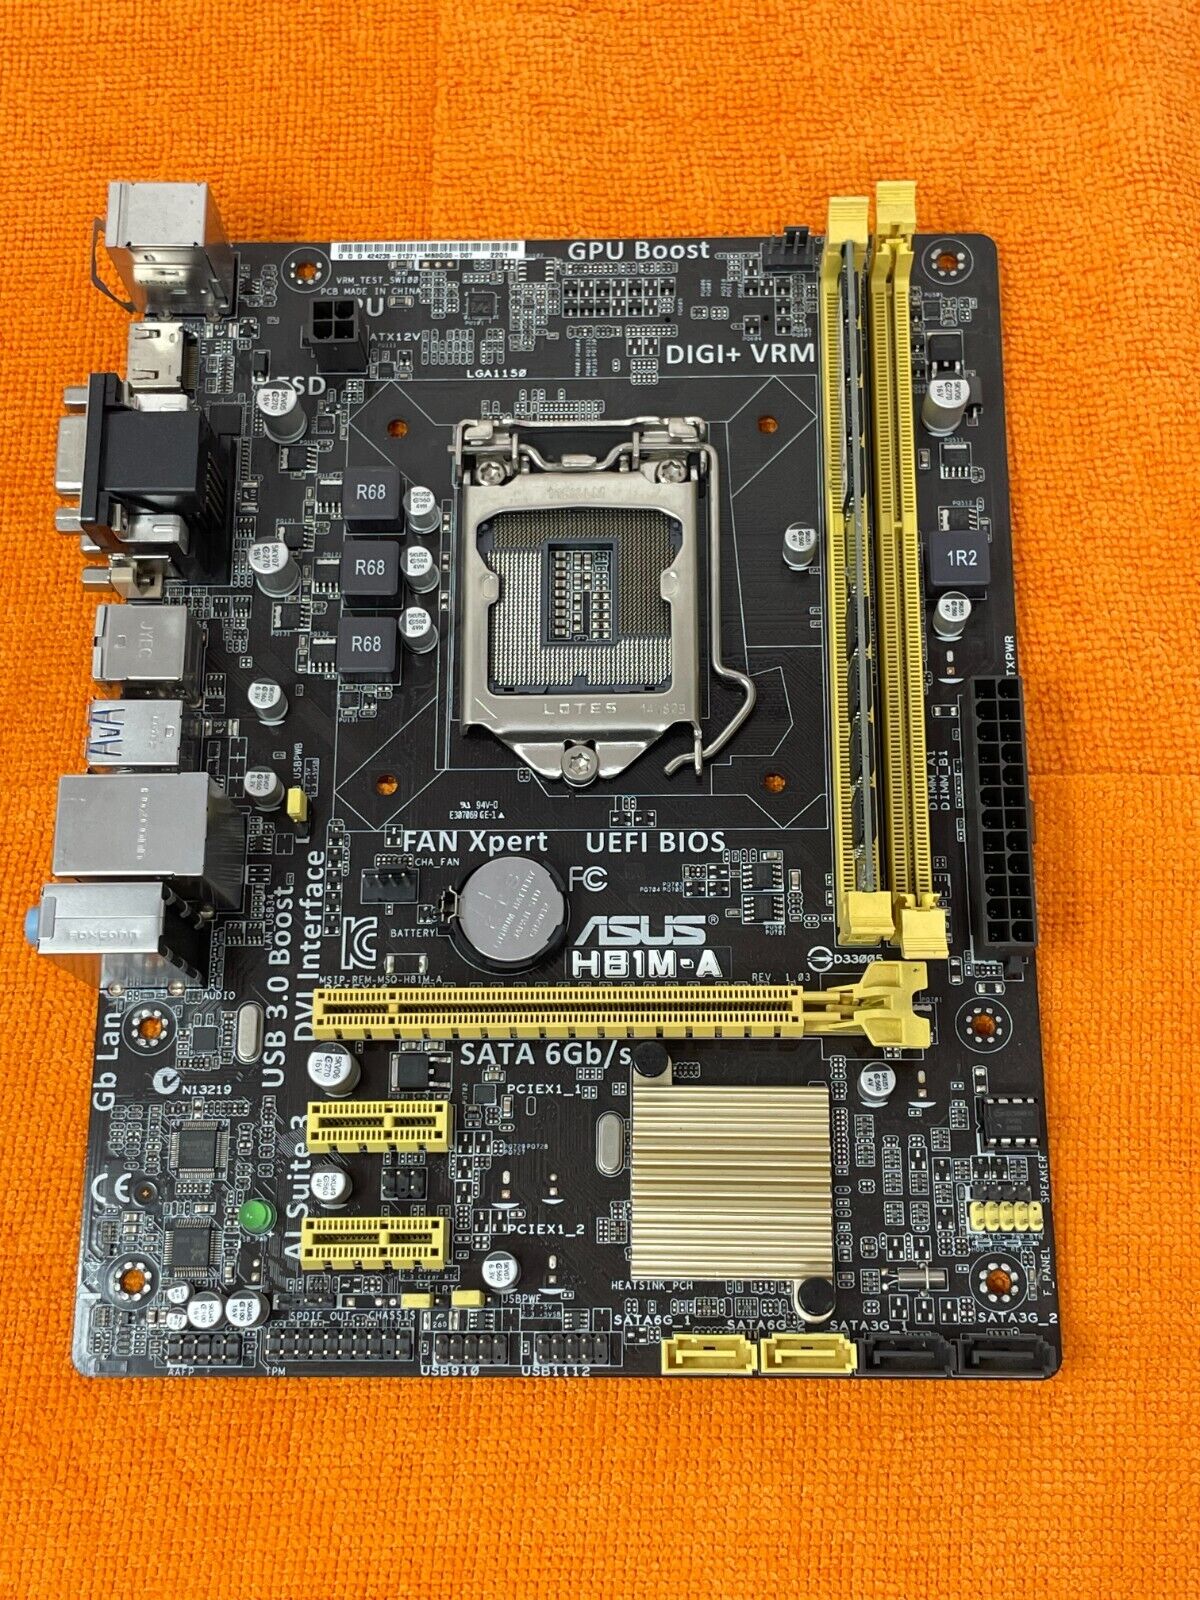 ASUS H81M-A MOTHERBOARD LGA 1150 MICRO ATX WITH KINGSTON 8GB DDR3